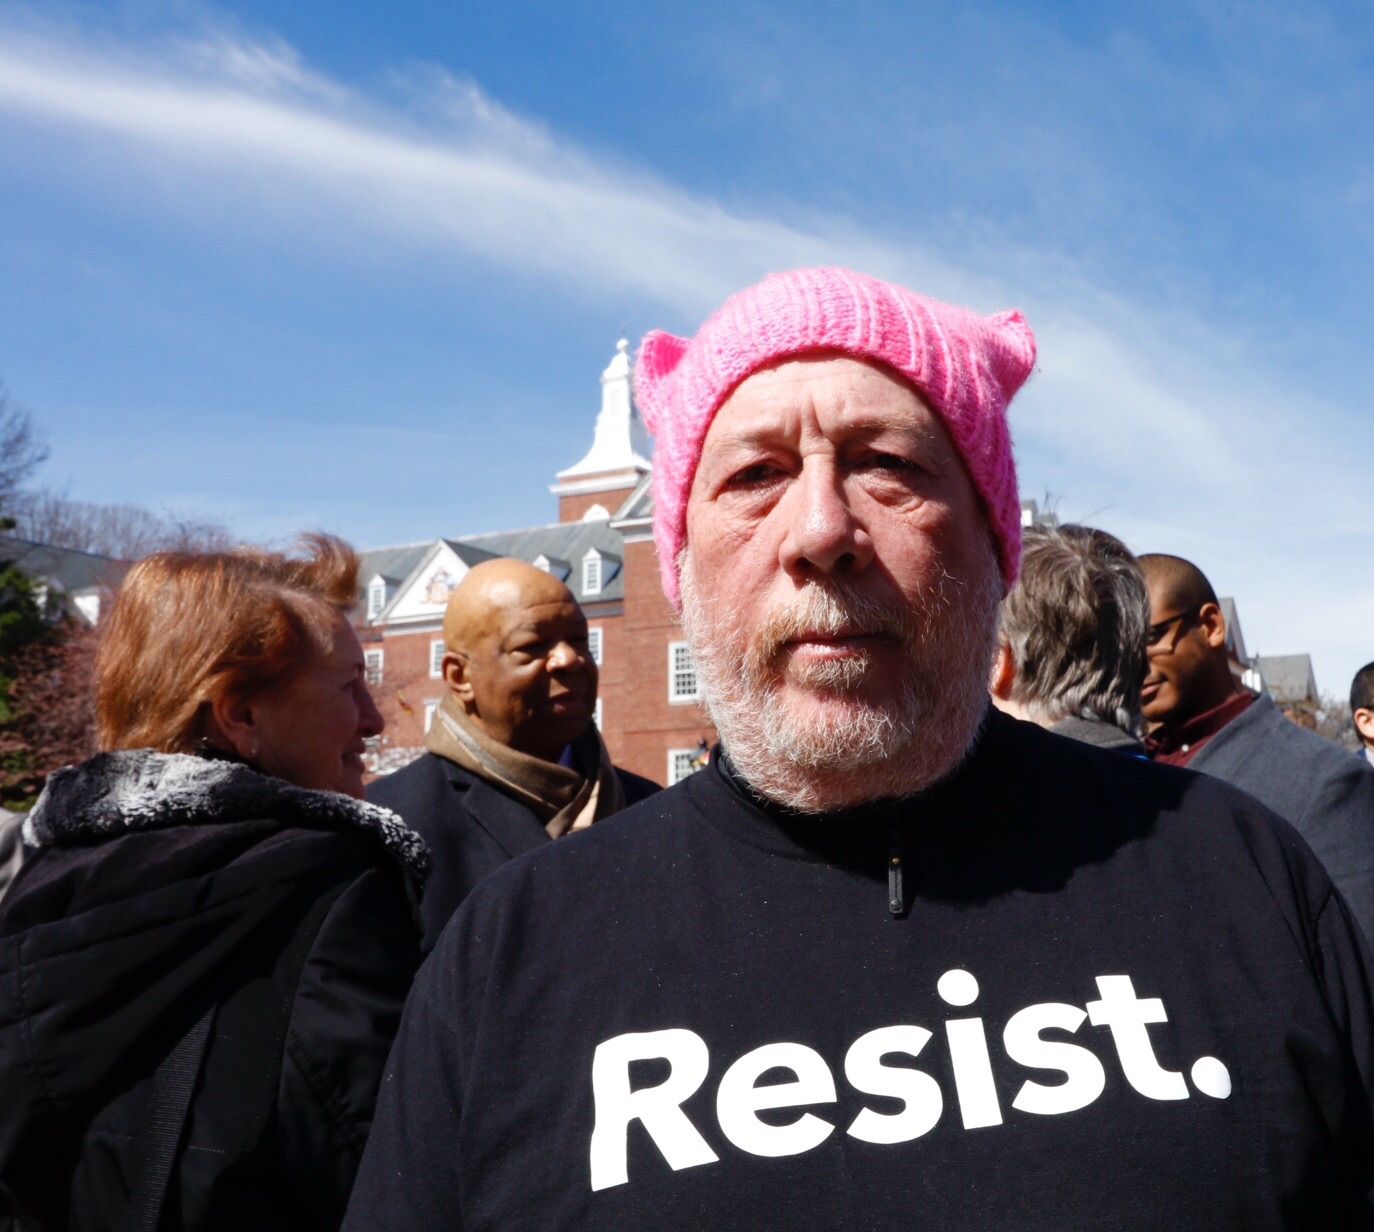 Bob Jones, of Annapolis, at a rally in front of the governor's mansion in Annapolis on Monday. (WTOP/Kate Ryan)